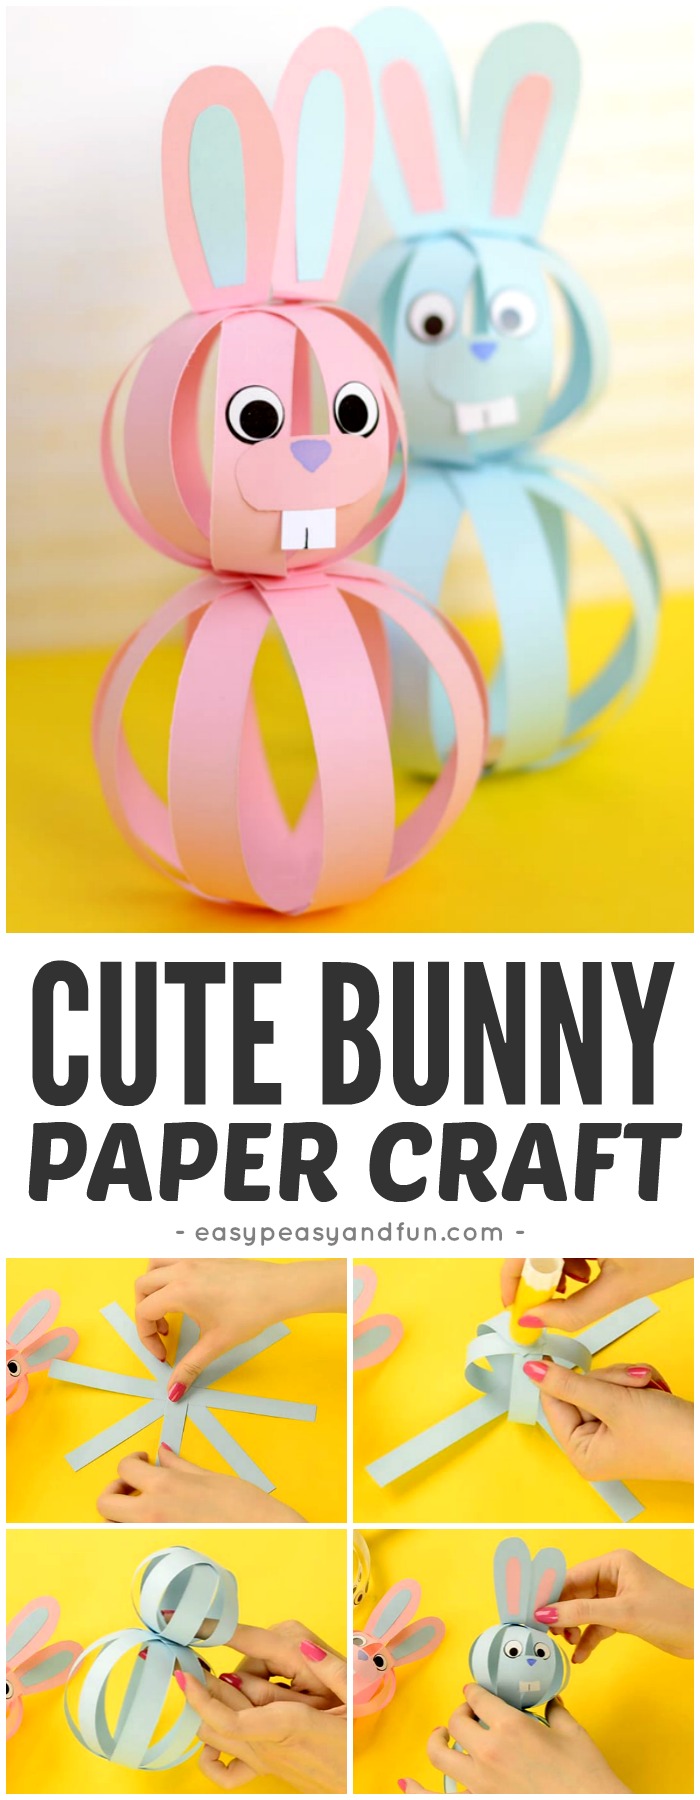 Cute and Simple Paper Bunny Craft for Kids to Make